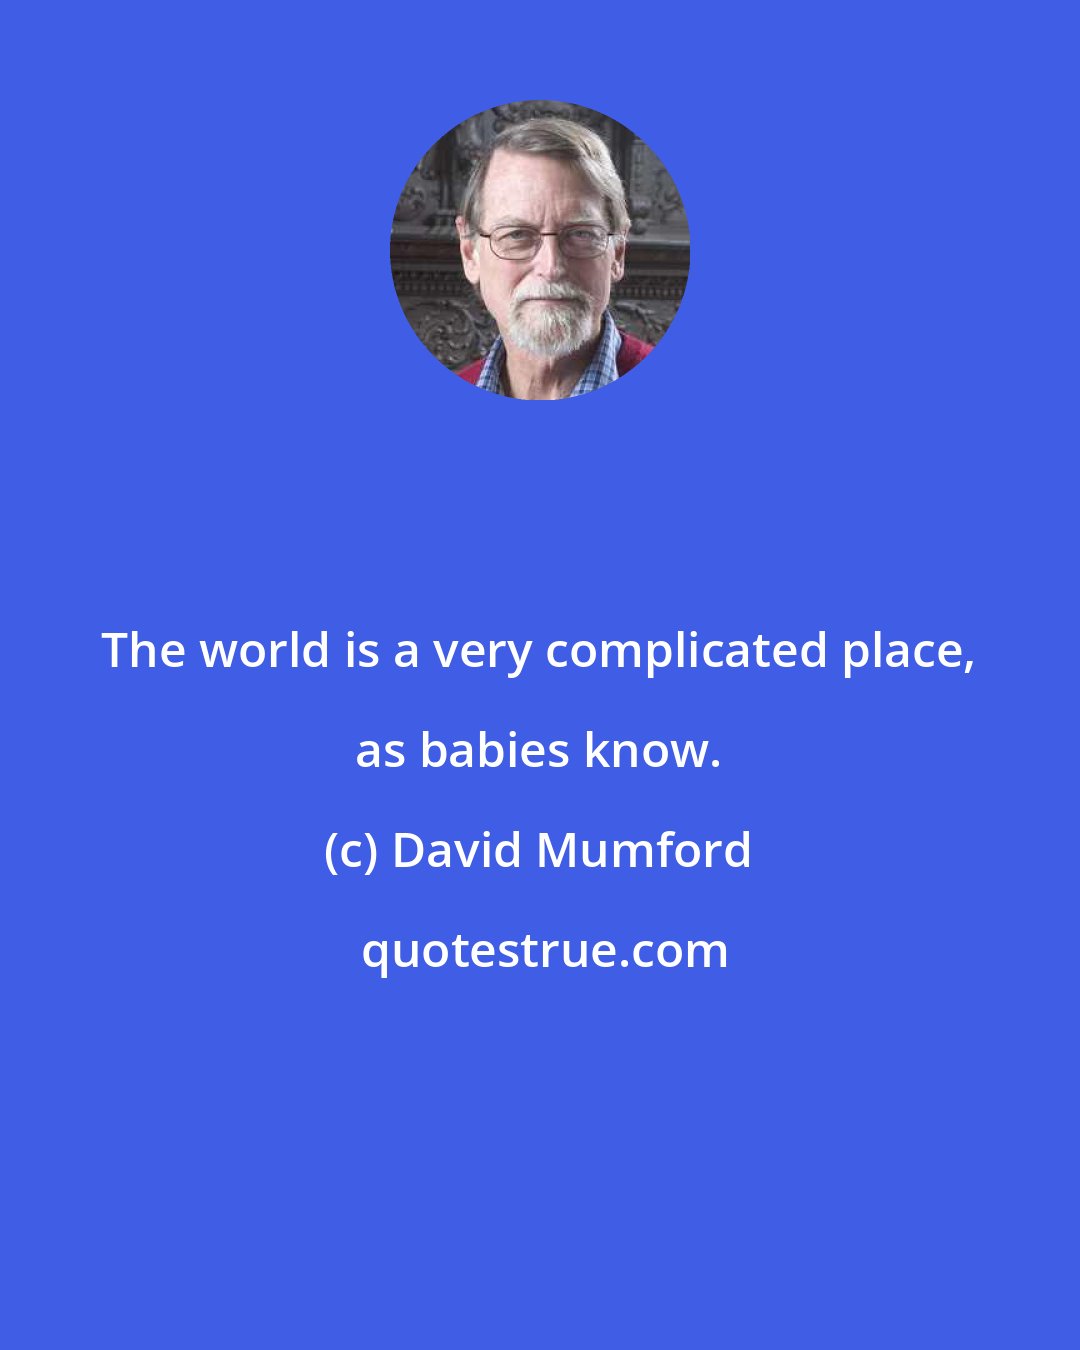 David Mumford: The world is a very complicated place, as babies know.